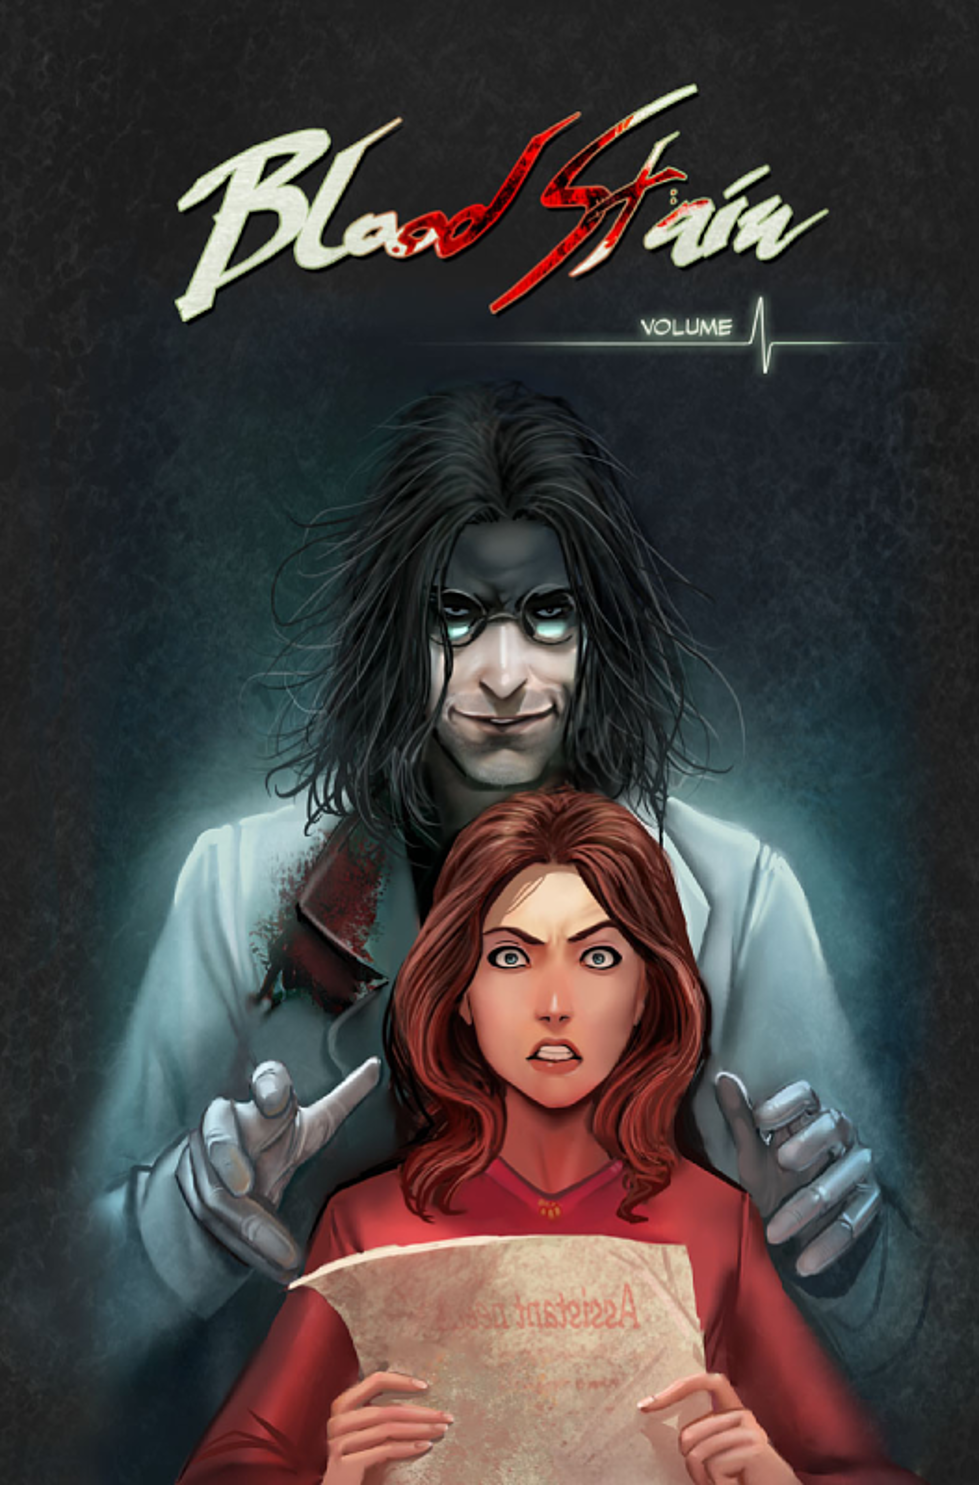 Linda Sejic&#8217;s Creepy, Funny Webcomic Comes to Print in &#8216;Blood Stain&#8217; v1 [Extended Preview]